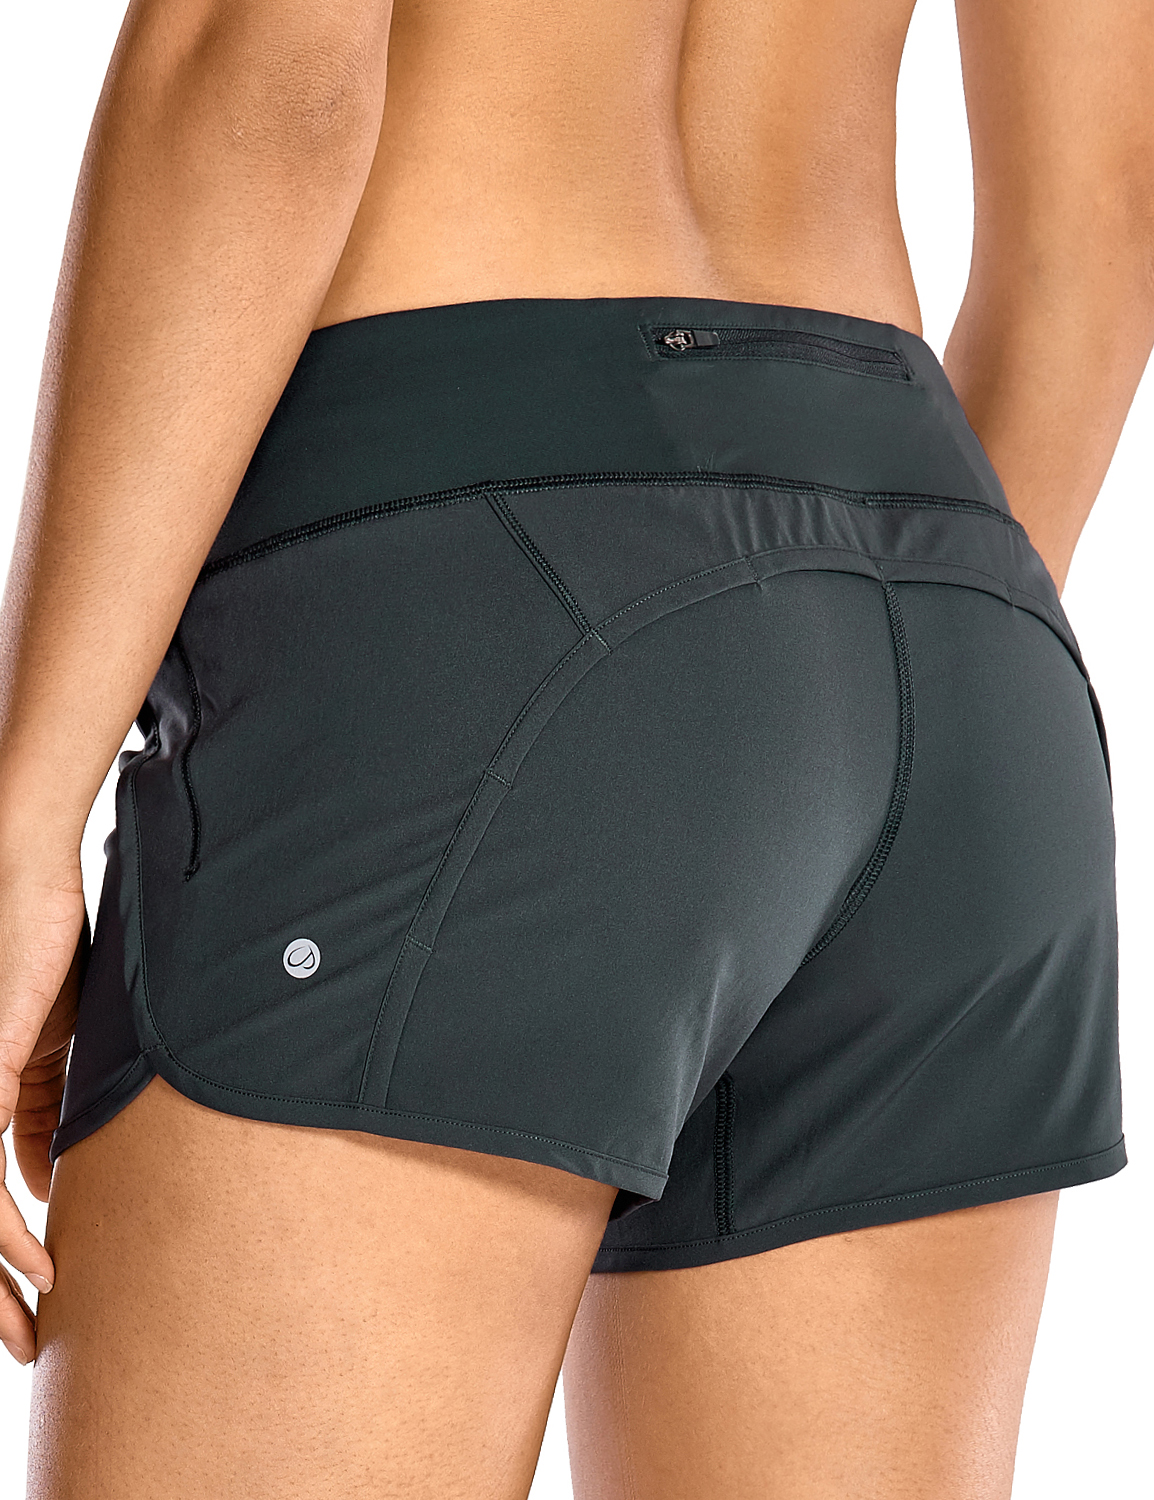 CRZ YOGA Lightweight Shorts Keep You Cool on Your Afternoon Run